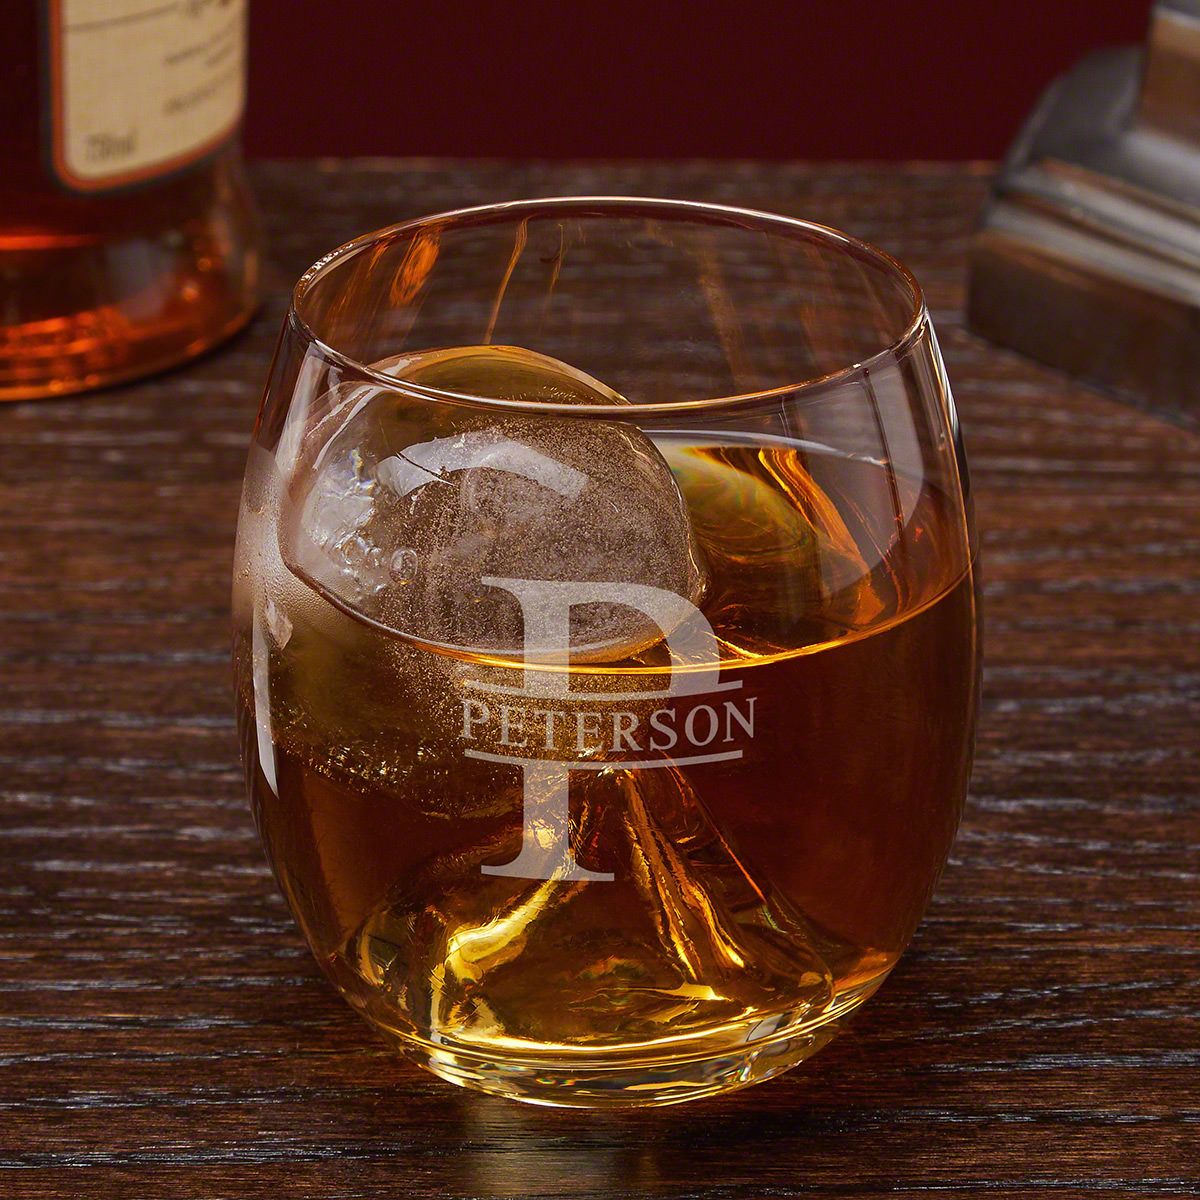 https://images.homewetbar.com/media/catalog/product/7/0/7040-oakmont-personalized-whiskey-glass-with-ice-ball-up-10-26.jpg?store=default&image-type=image